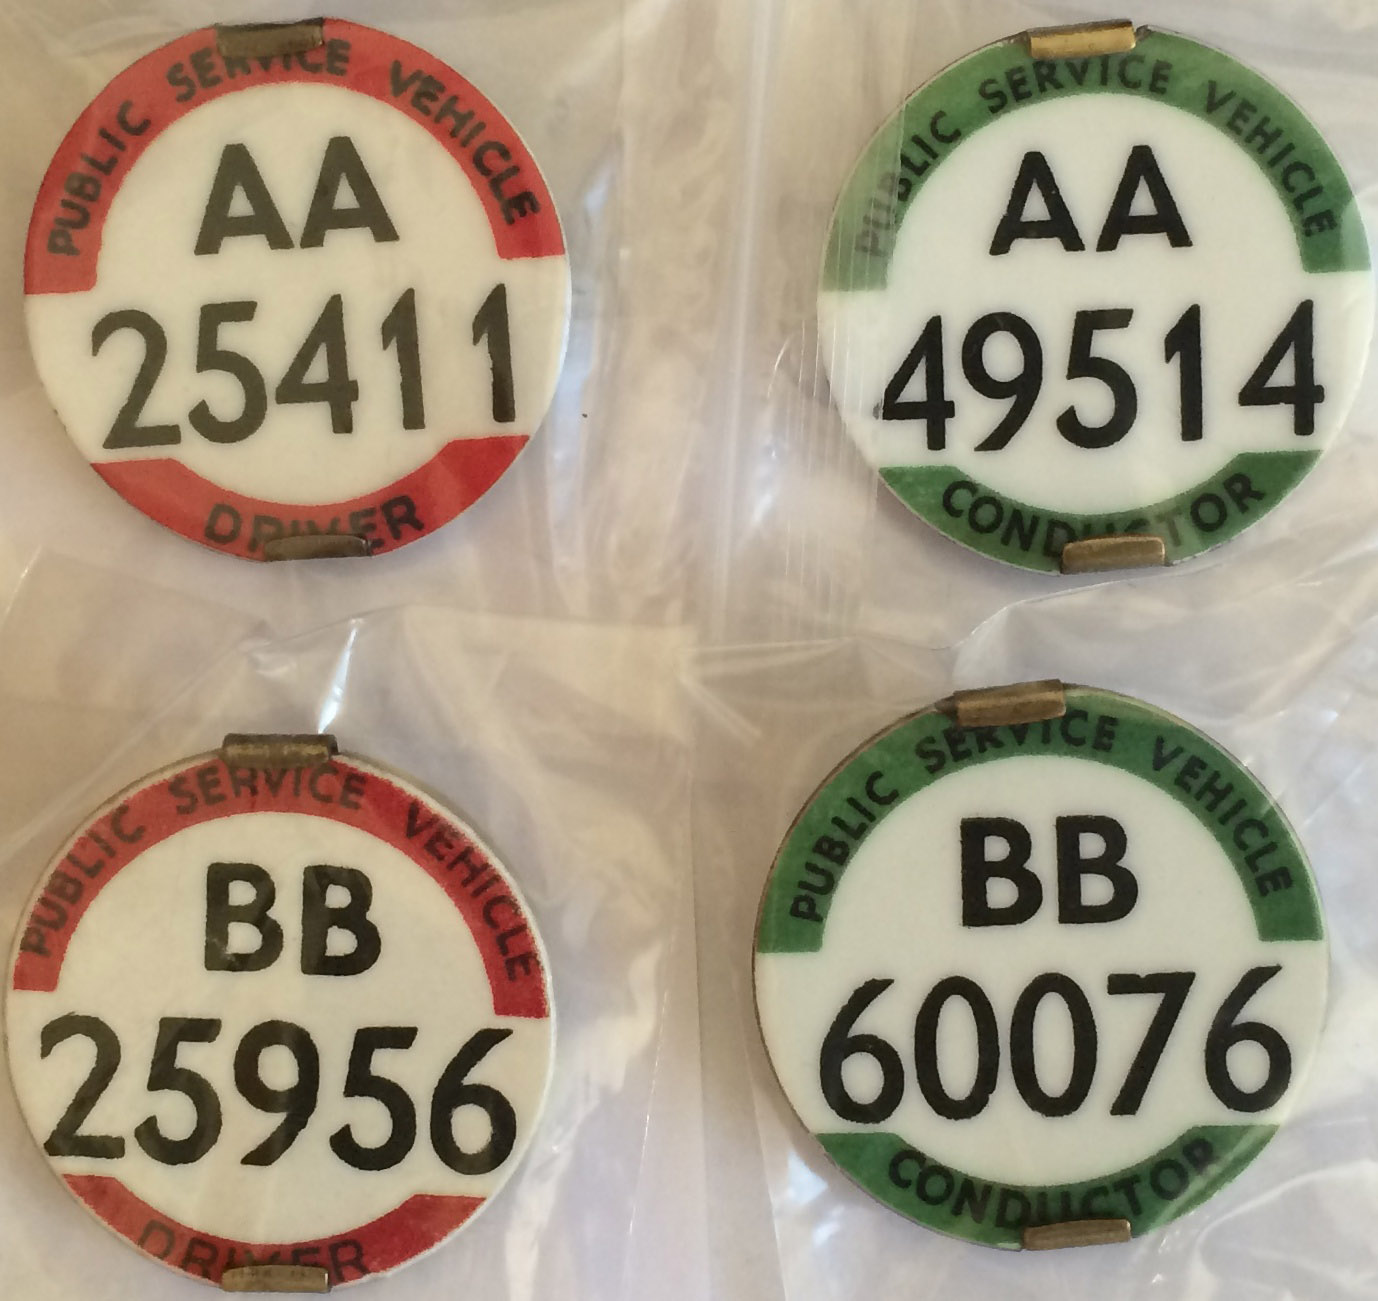 Sets of bus Driver's and Conductor's PSV BADGES for the Northern & Yorkshire (AA & BB) Regions